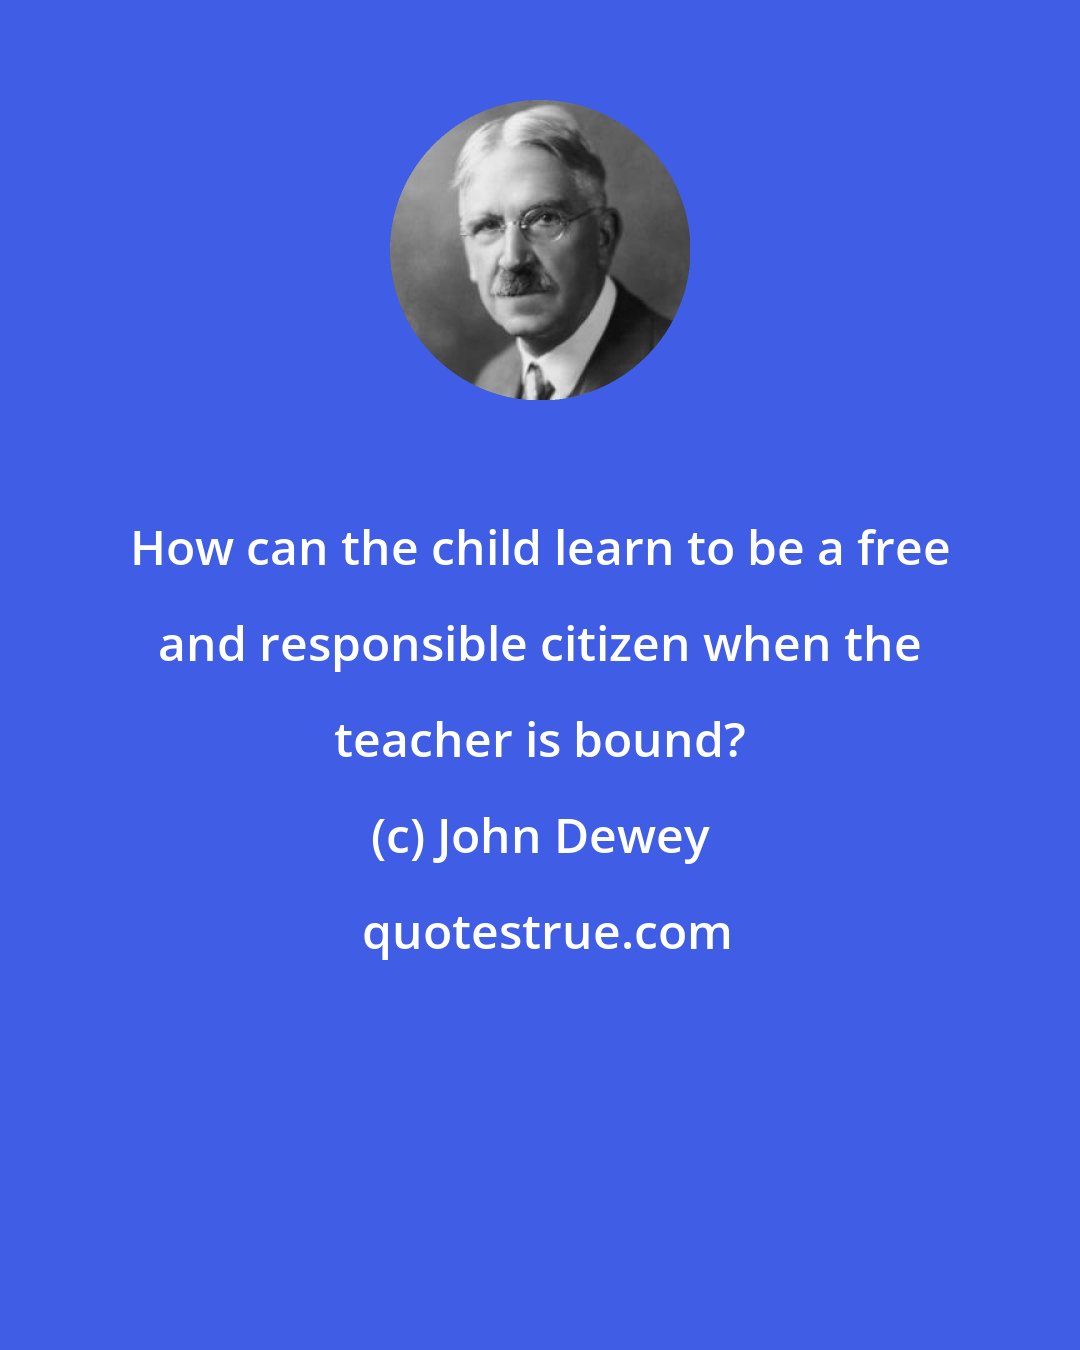 John Dewey: How can the child learn to be a free and responsible citizen when the teacher is bound?